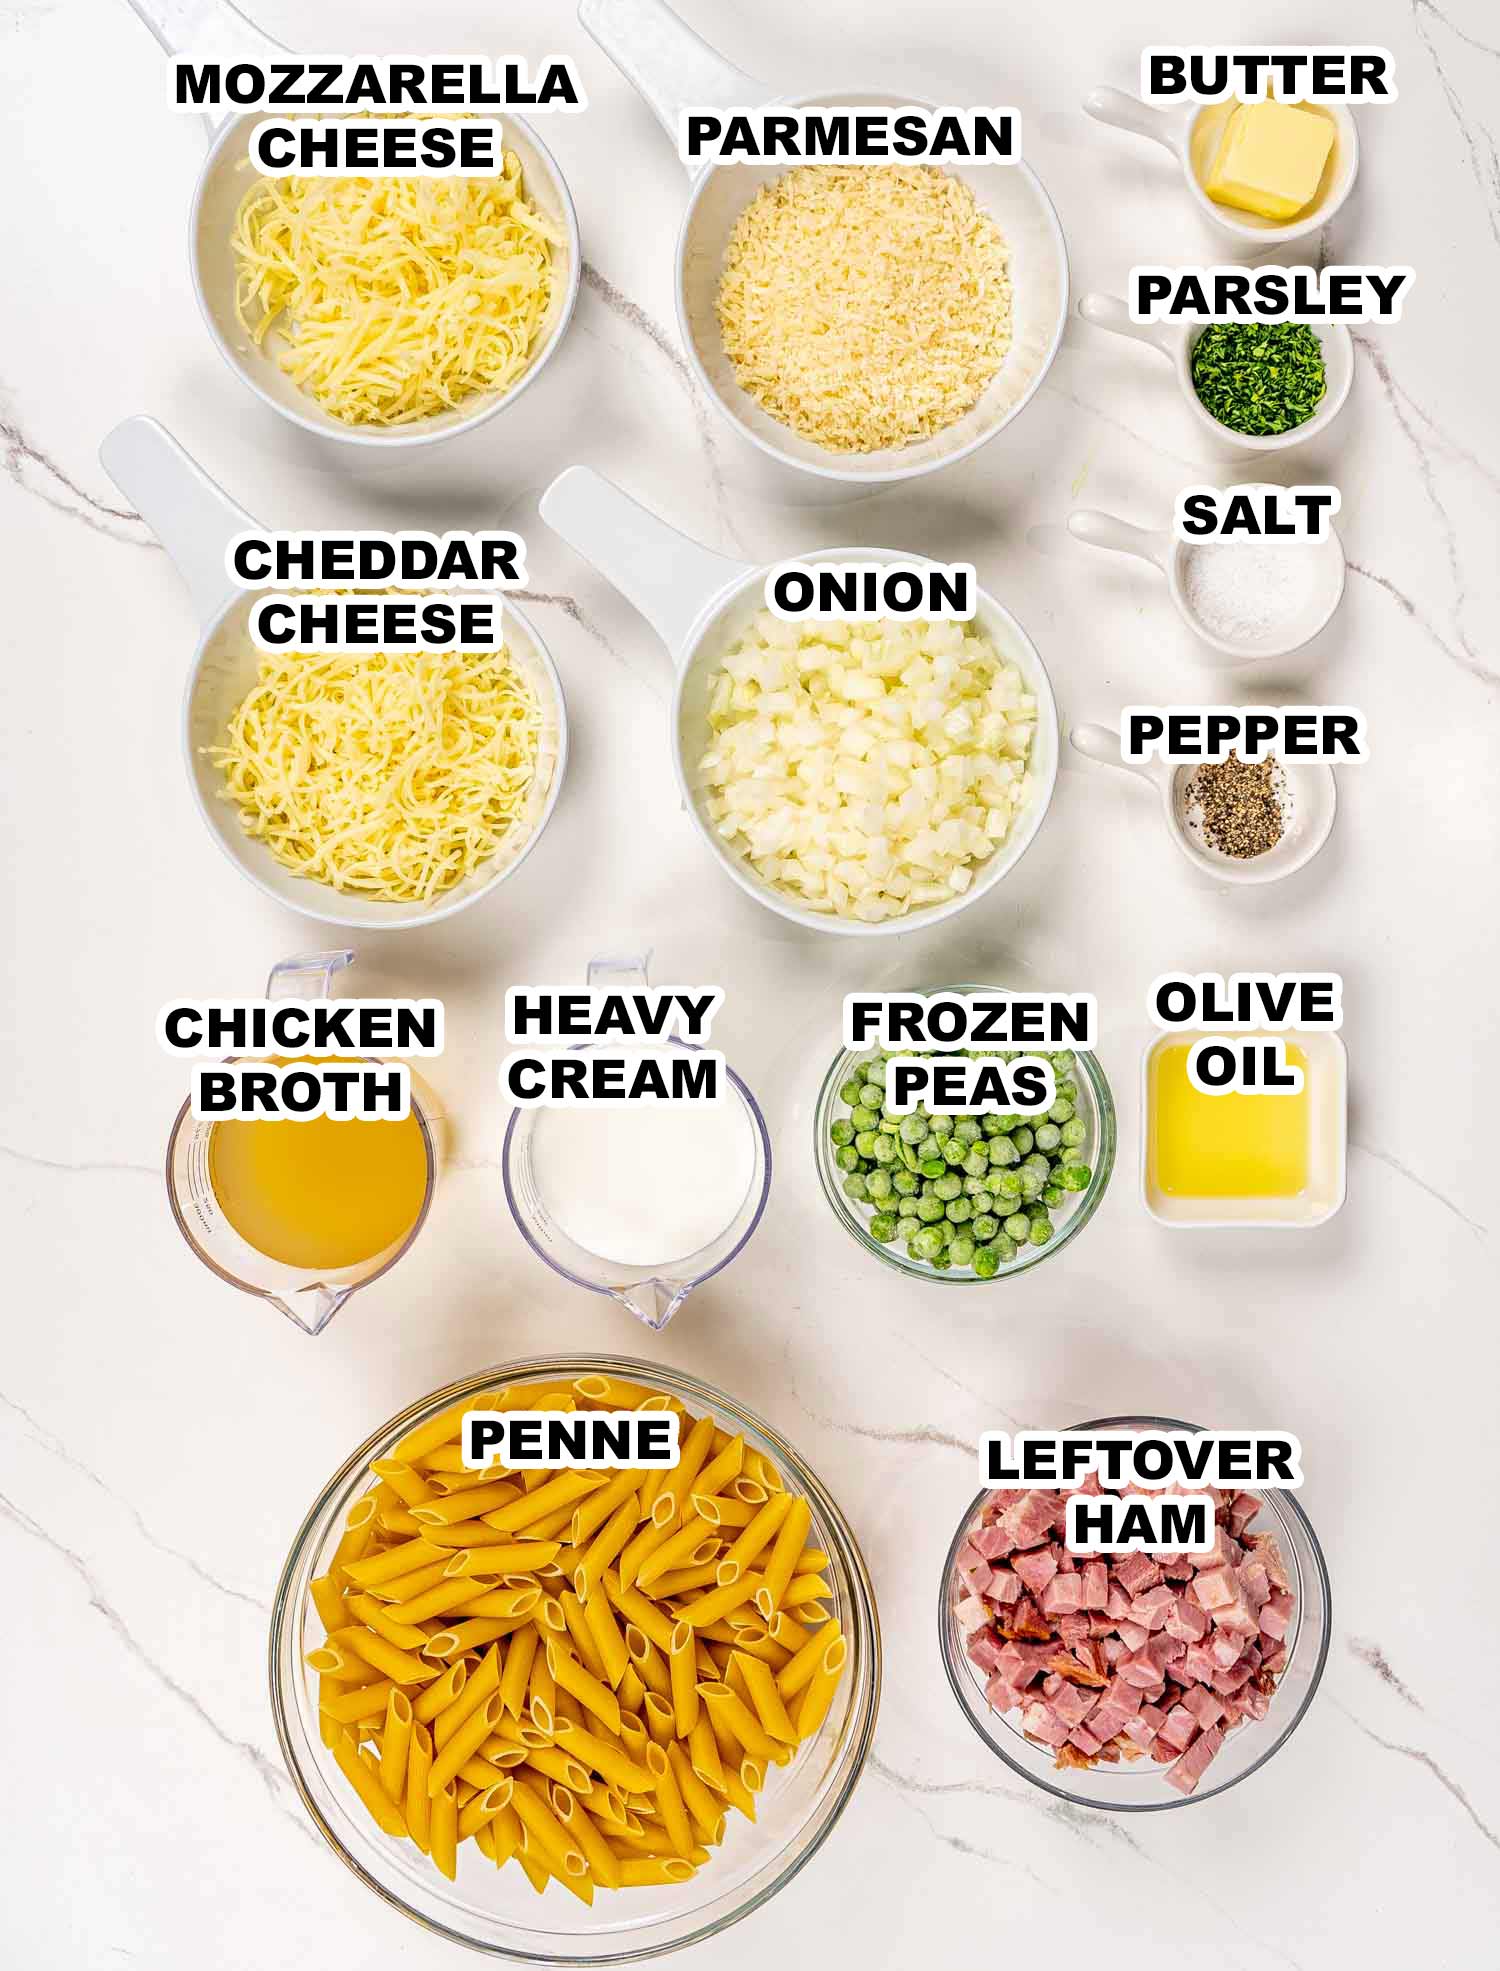 ingredients needed to make leftover ham and cheese penne.